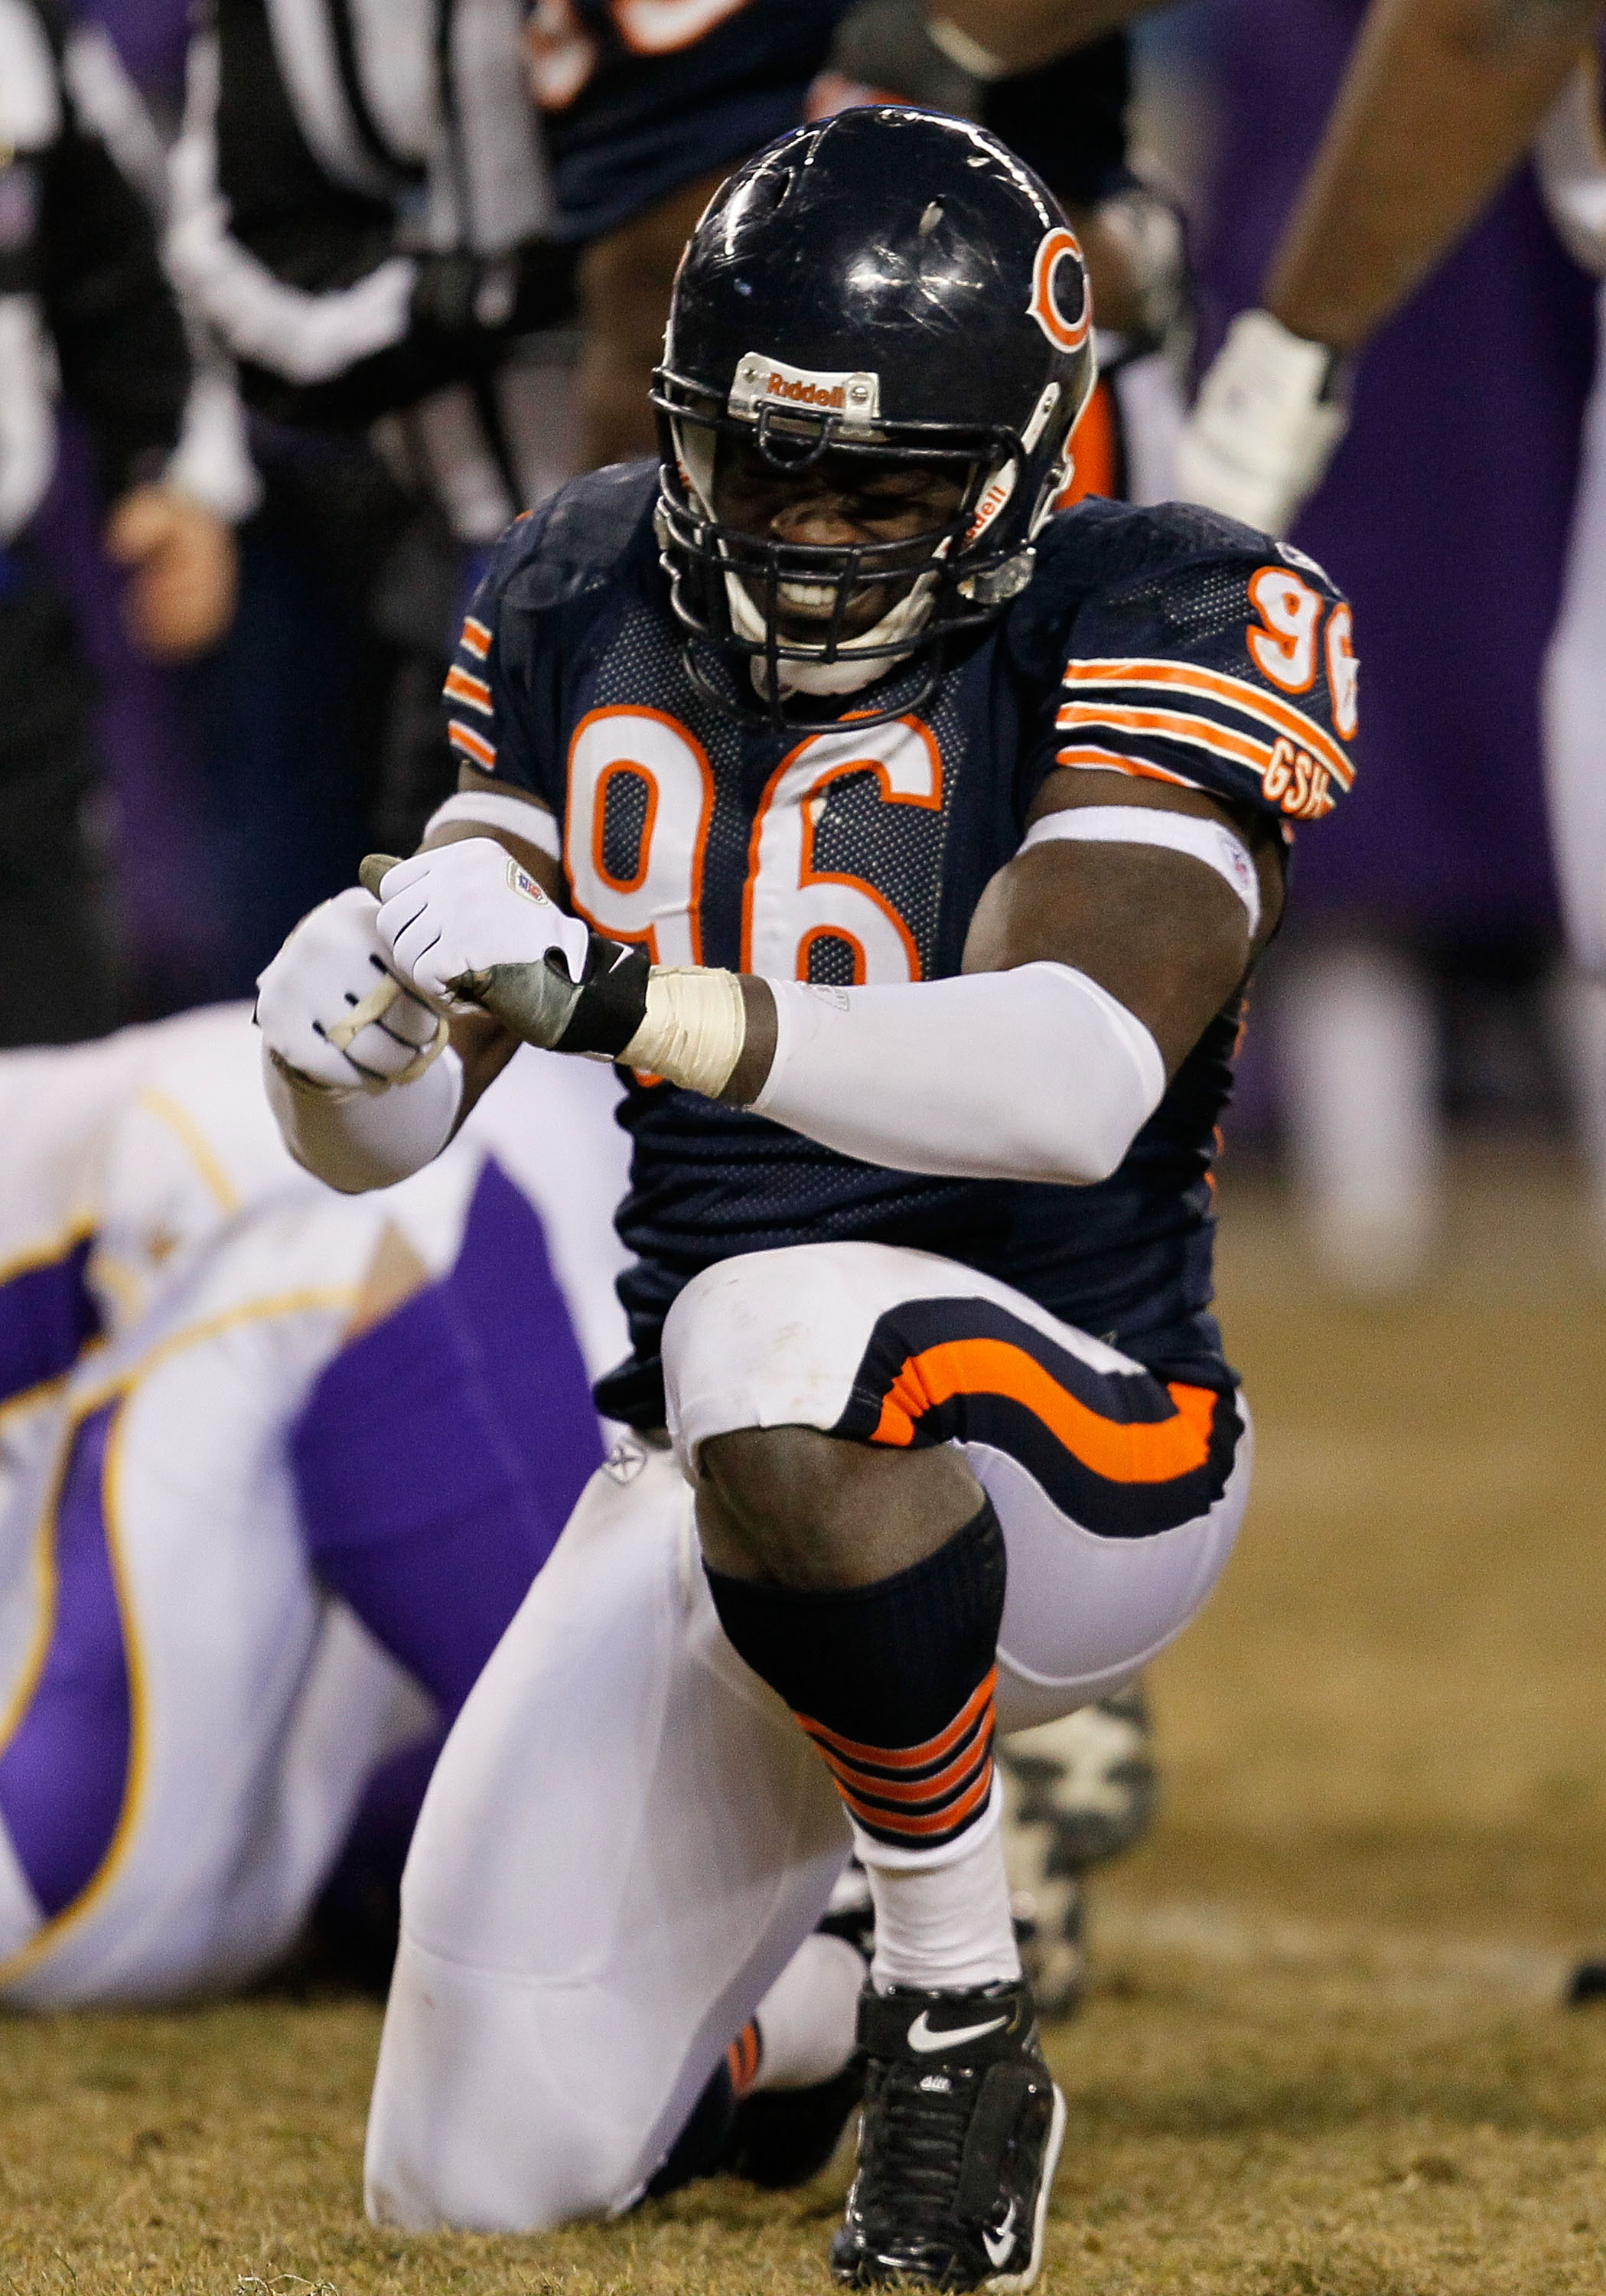 CHICAGO - DECEMBER 28: Alex Brown #96 of the Chicago Bears celebrates a sack of Brett Favre of the Minnesota Vikings at Soldier Field on December 28, 2009 in Chicago, Illinois. The Bears defeated the Vikings 36-30 in overtime. (Photo by Jonathan Daniel/Ge